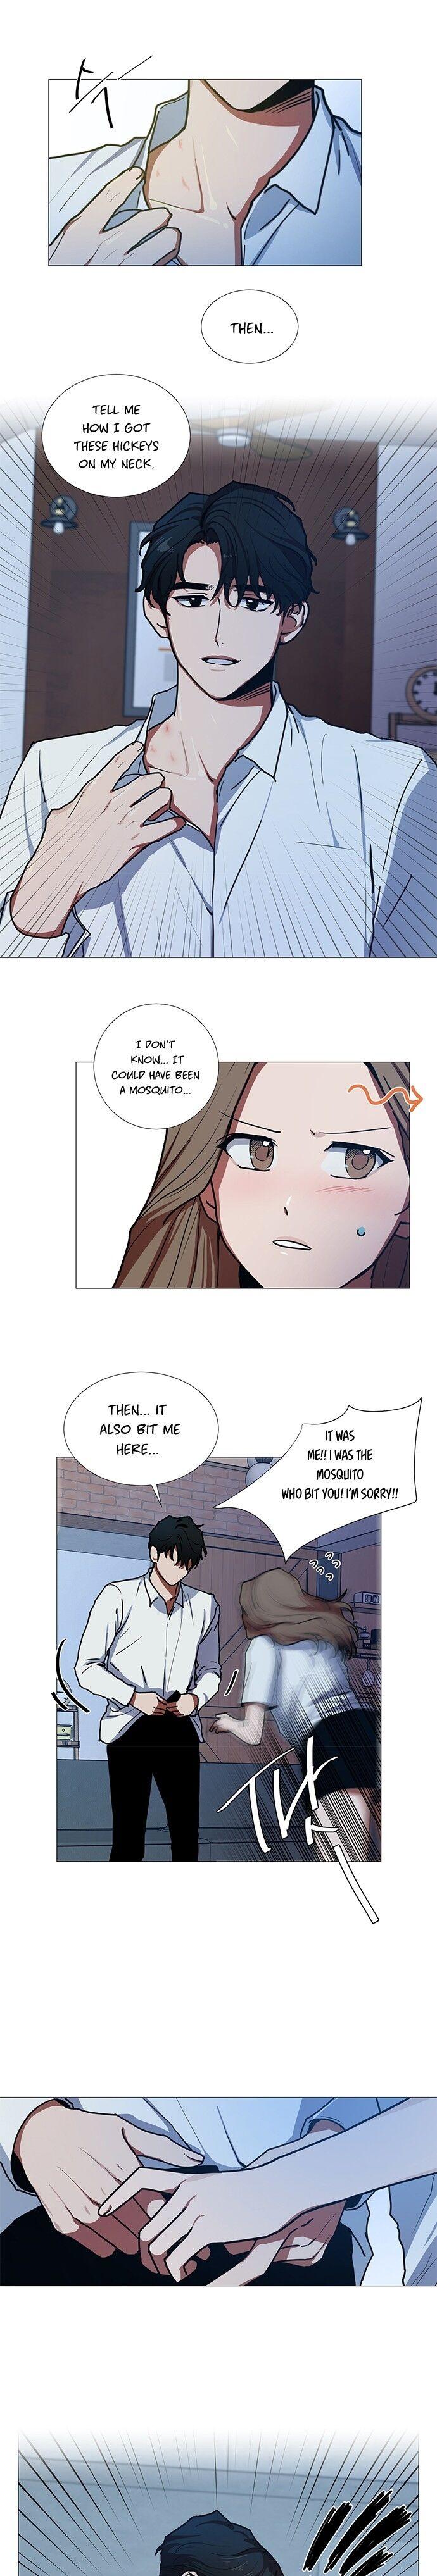 Manhwa time one more Free reading